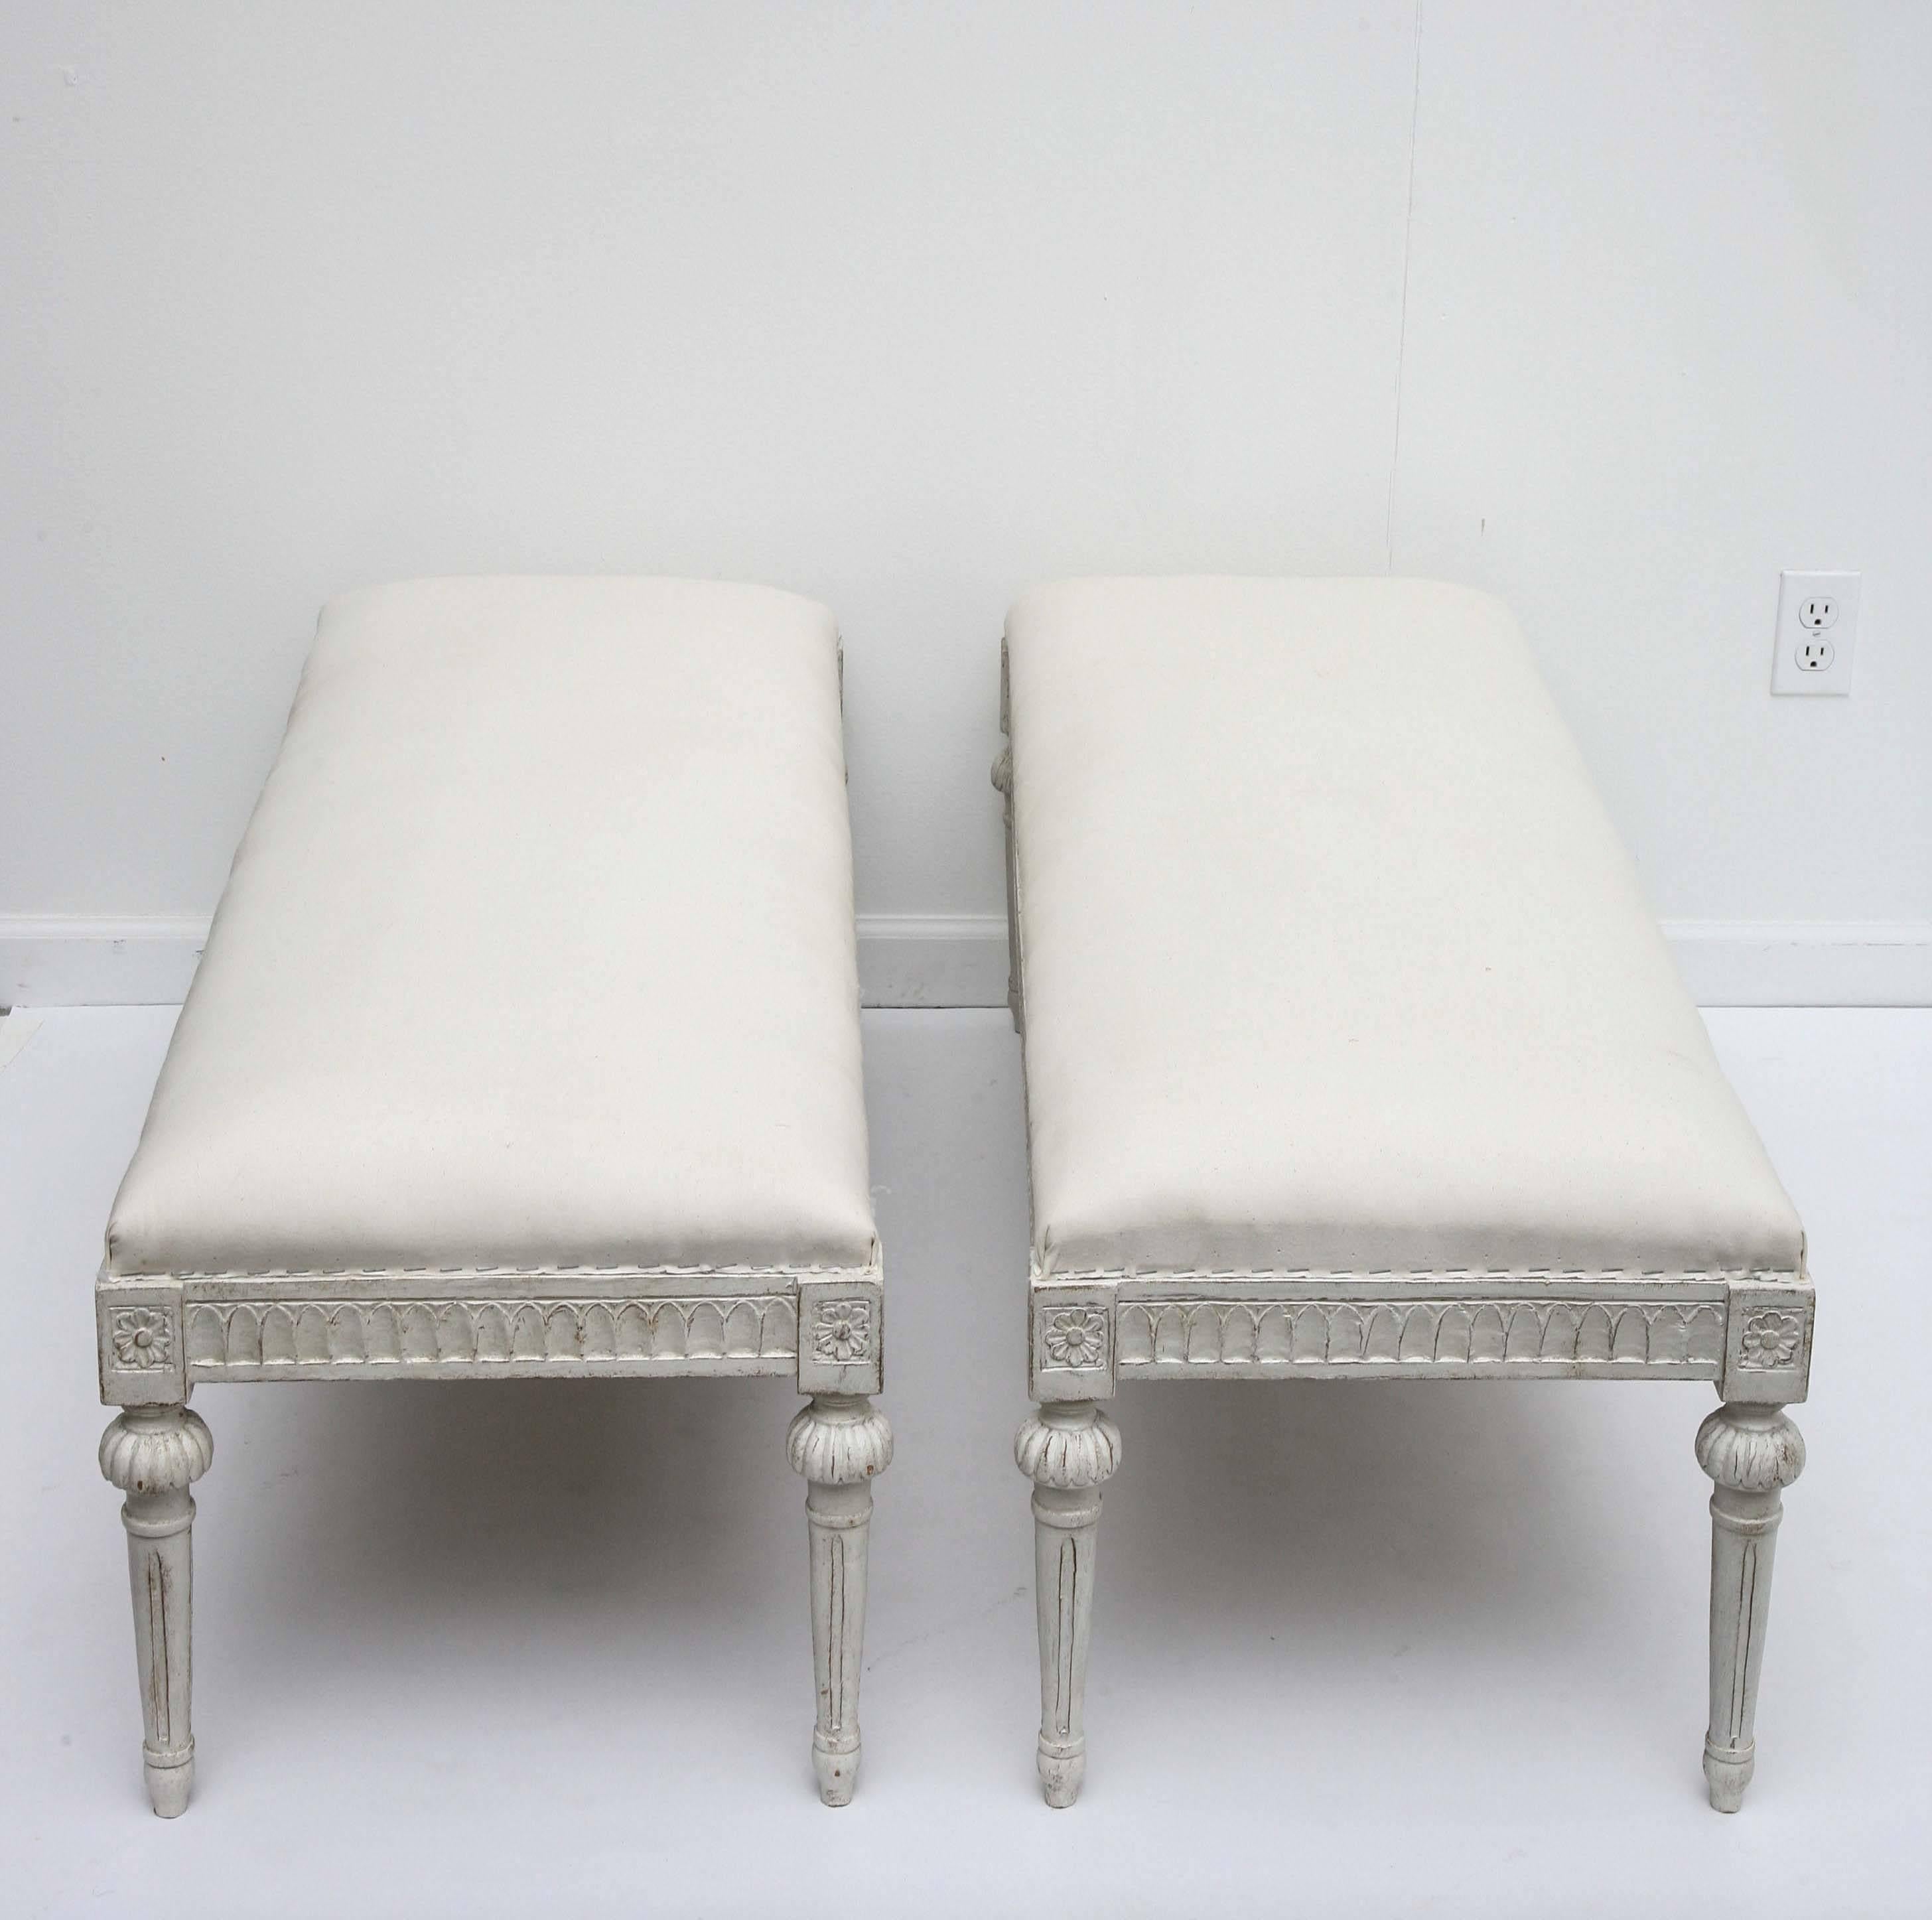 A pair of unusual antique Swedish Gustavian painted benches, with carved lambs tongue border on apron, round tapered fluted legs with lovely fluted
round caps on top of legs, carved floral rosettes at top of each leg in the border,
painted in